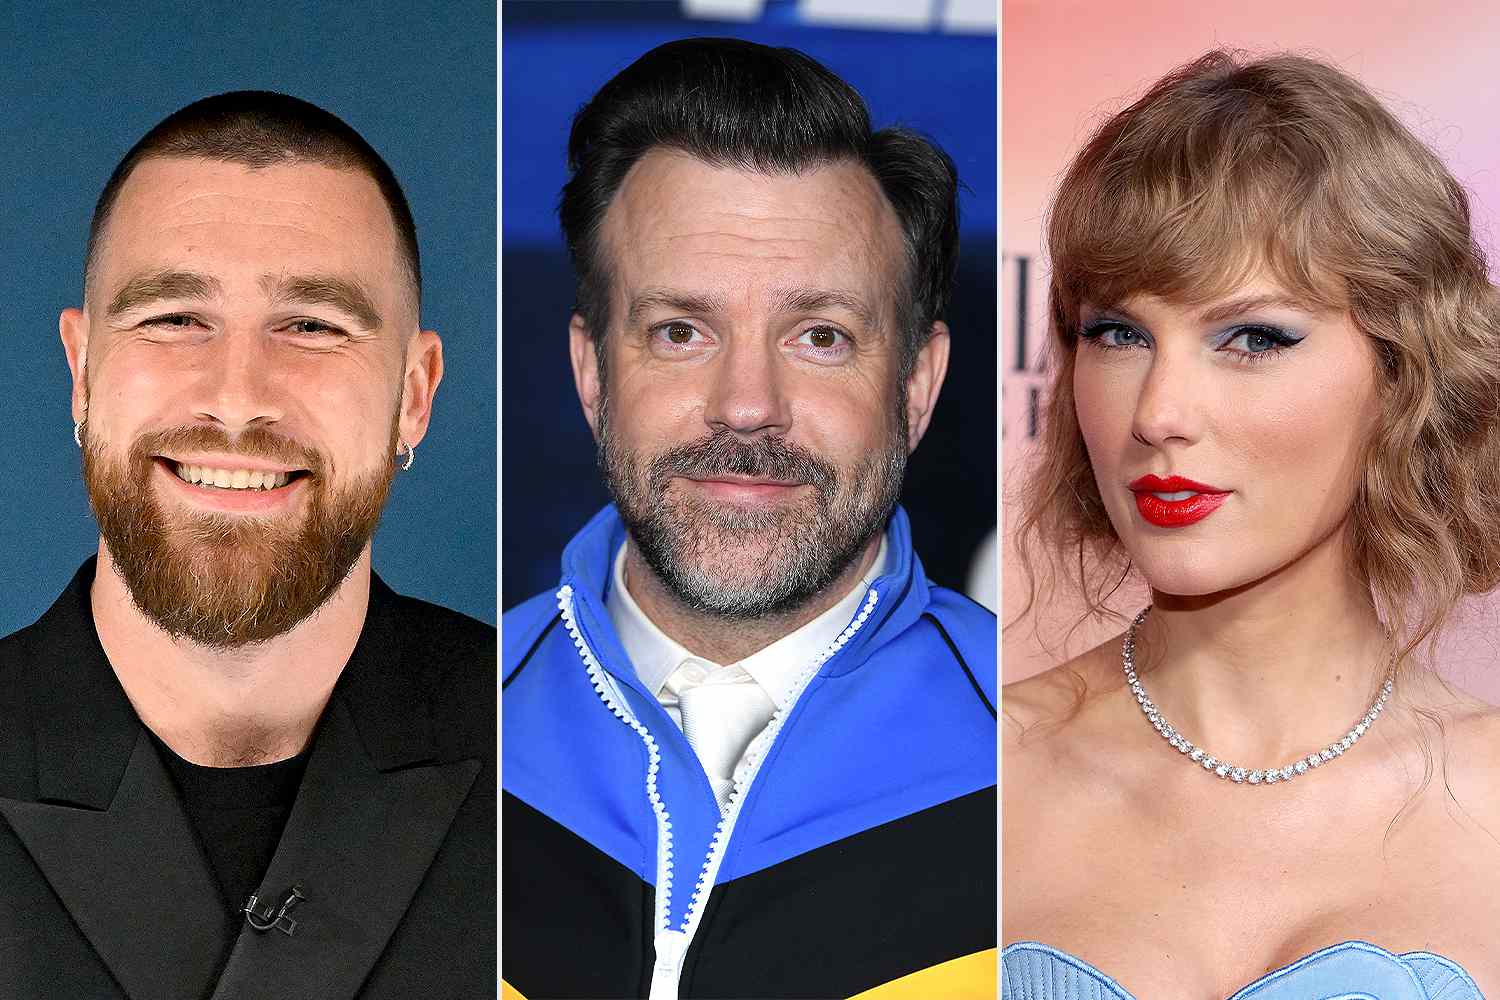 BREAKING: Here is everything you need to know about what Jason Sudeikis said about Taylor Swift during the Big Slick Celebrity Weekend and how Travis Kelce reacted.